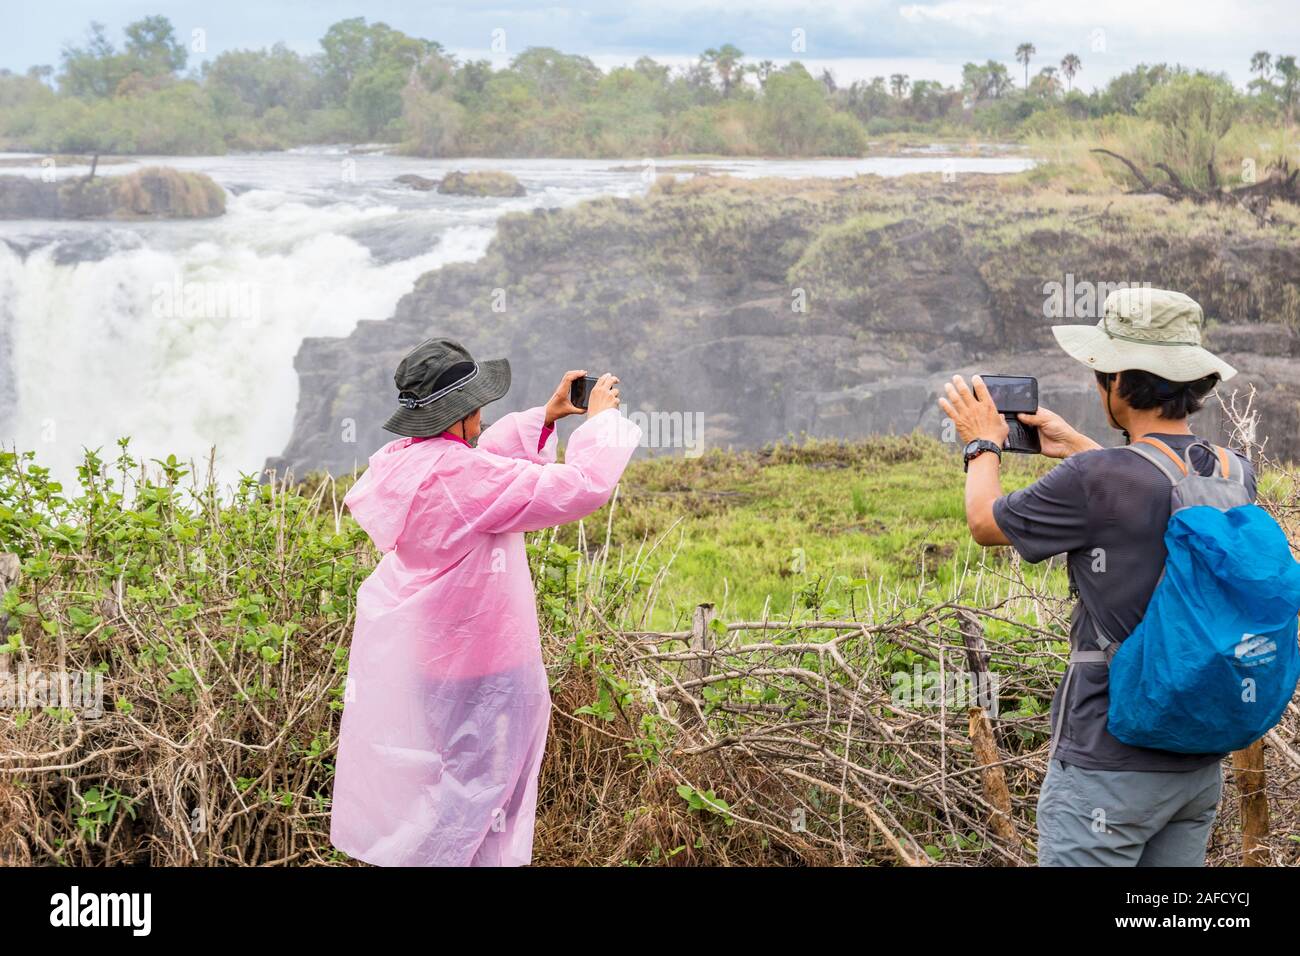 Victoria Falls, Zimbabwe. Two hikers take pictures of the falls. Livingstone Island can be seen in the background. Stock Photo